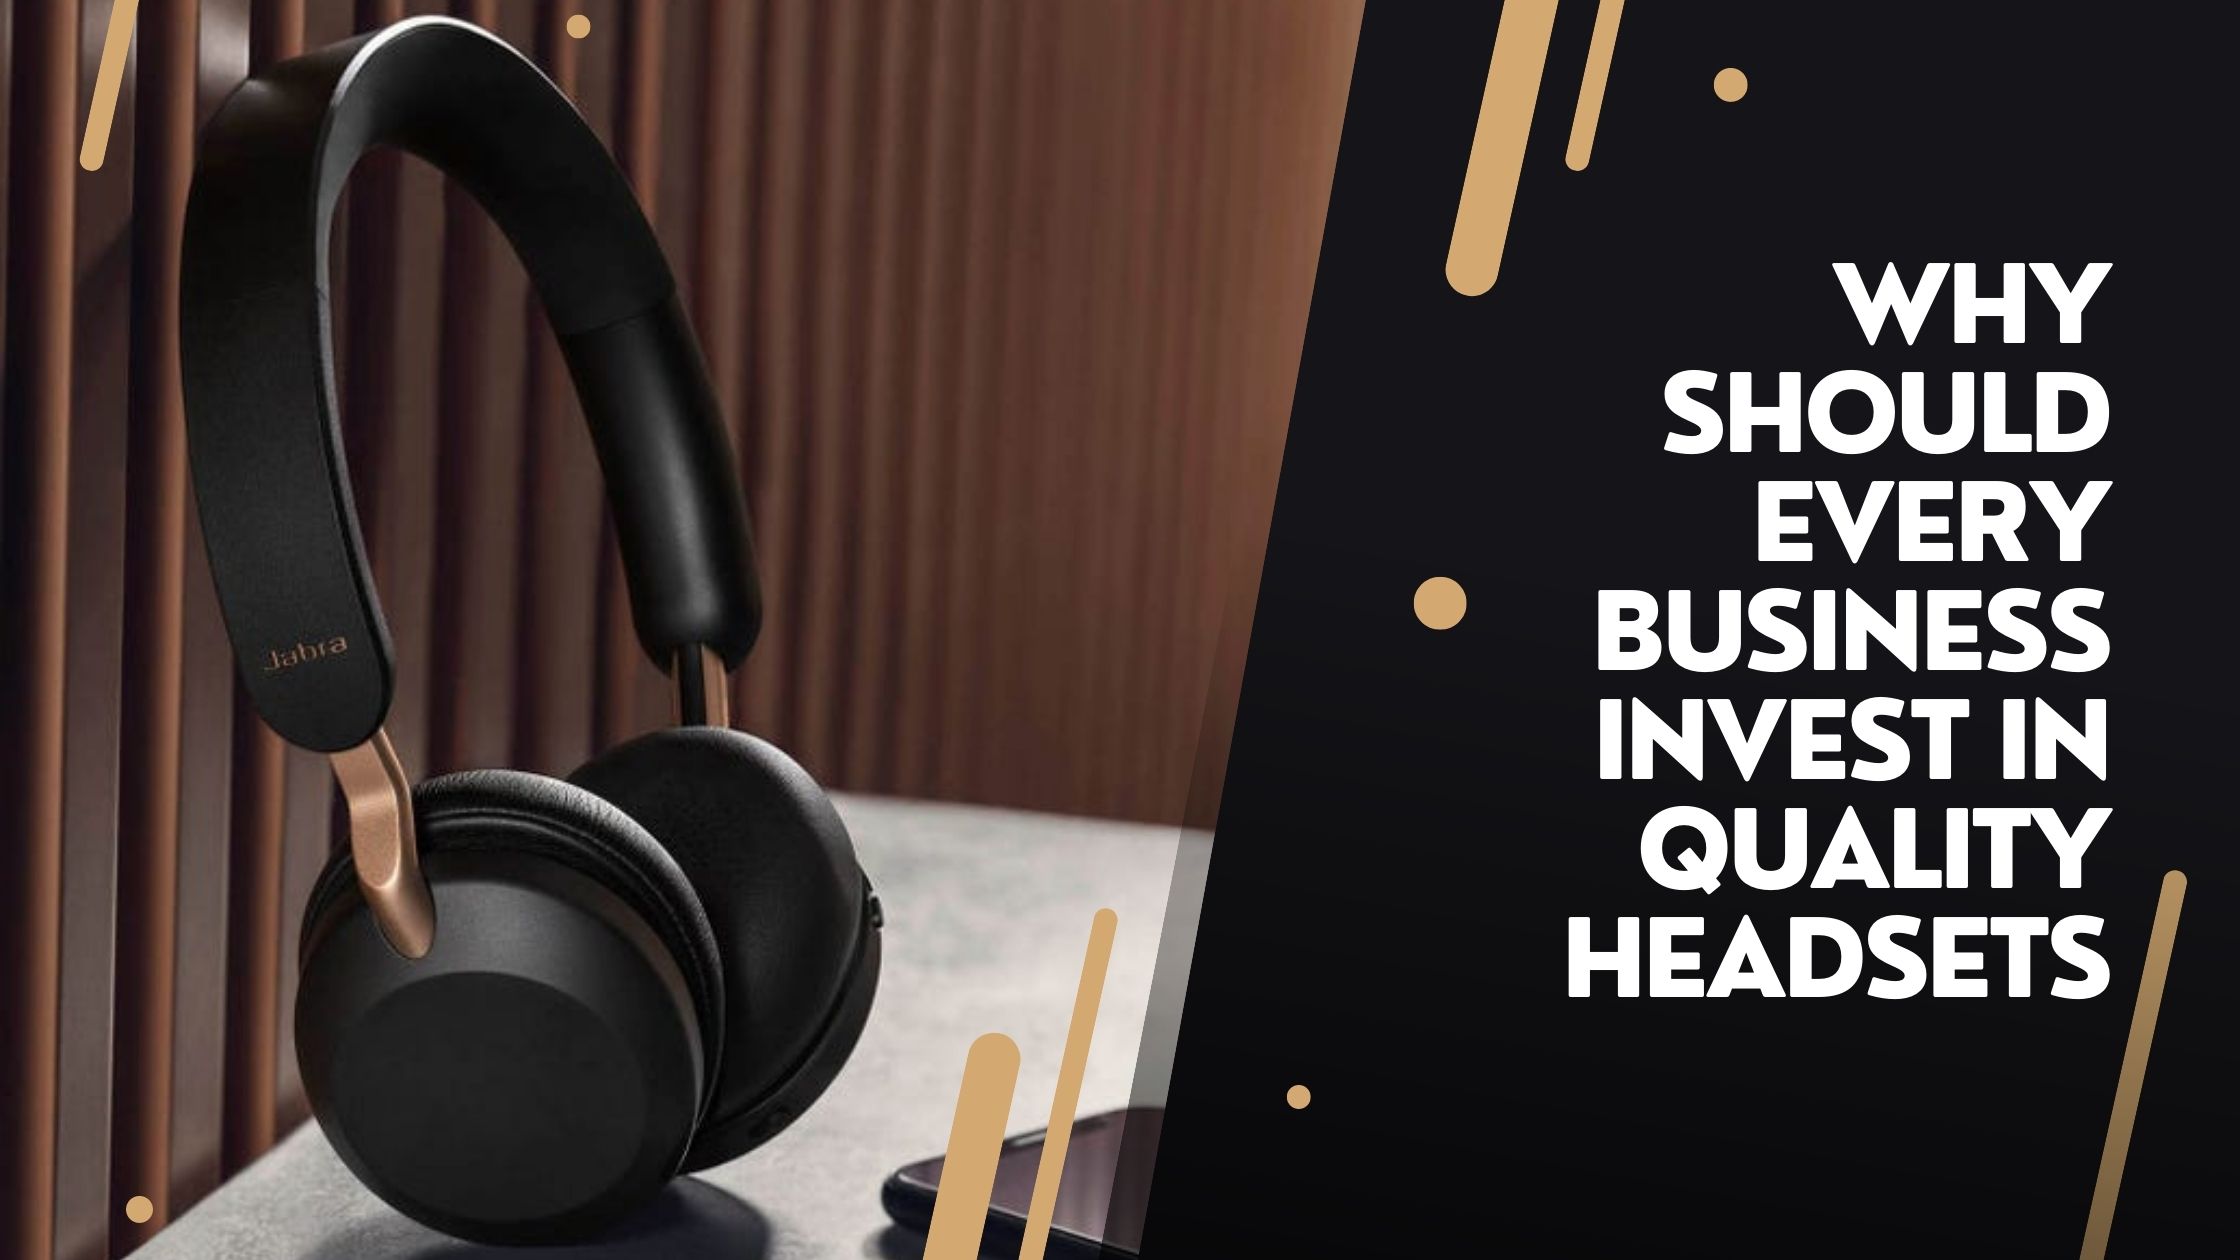 Why Should Every Business Invest In Quality Headsets?